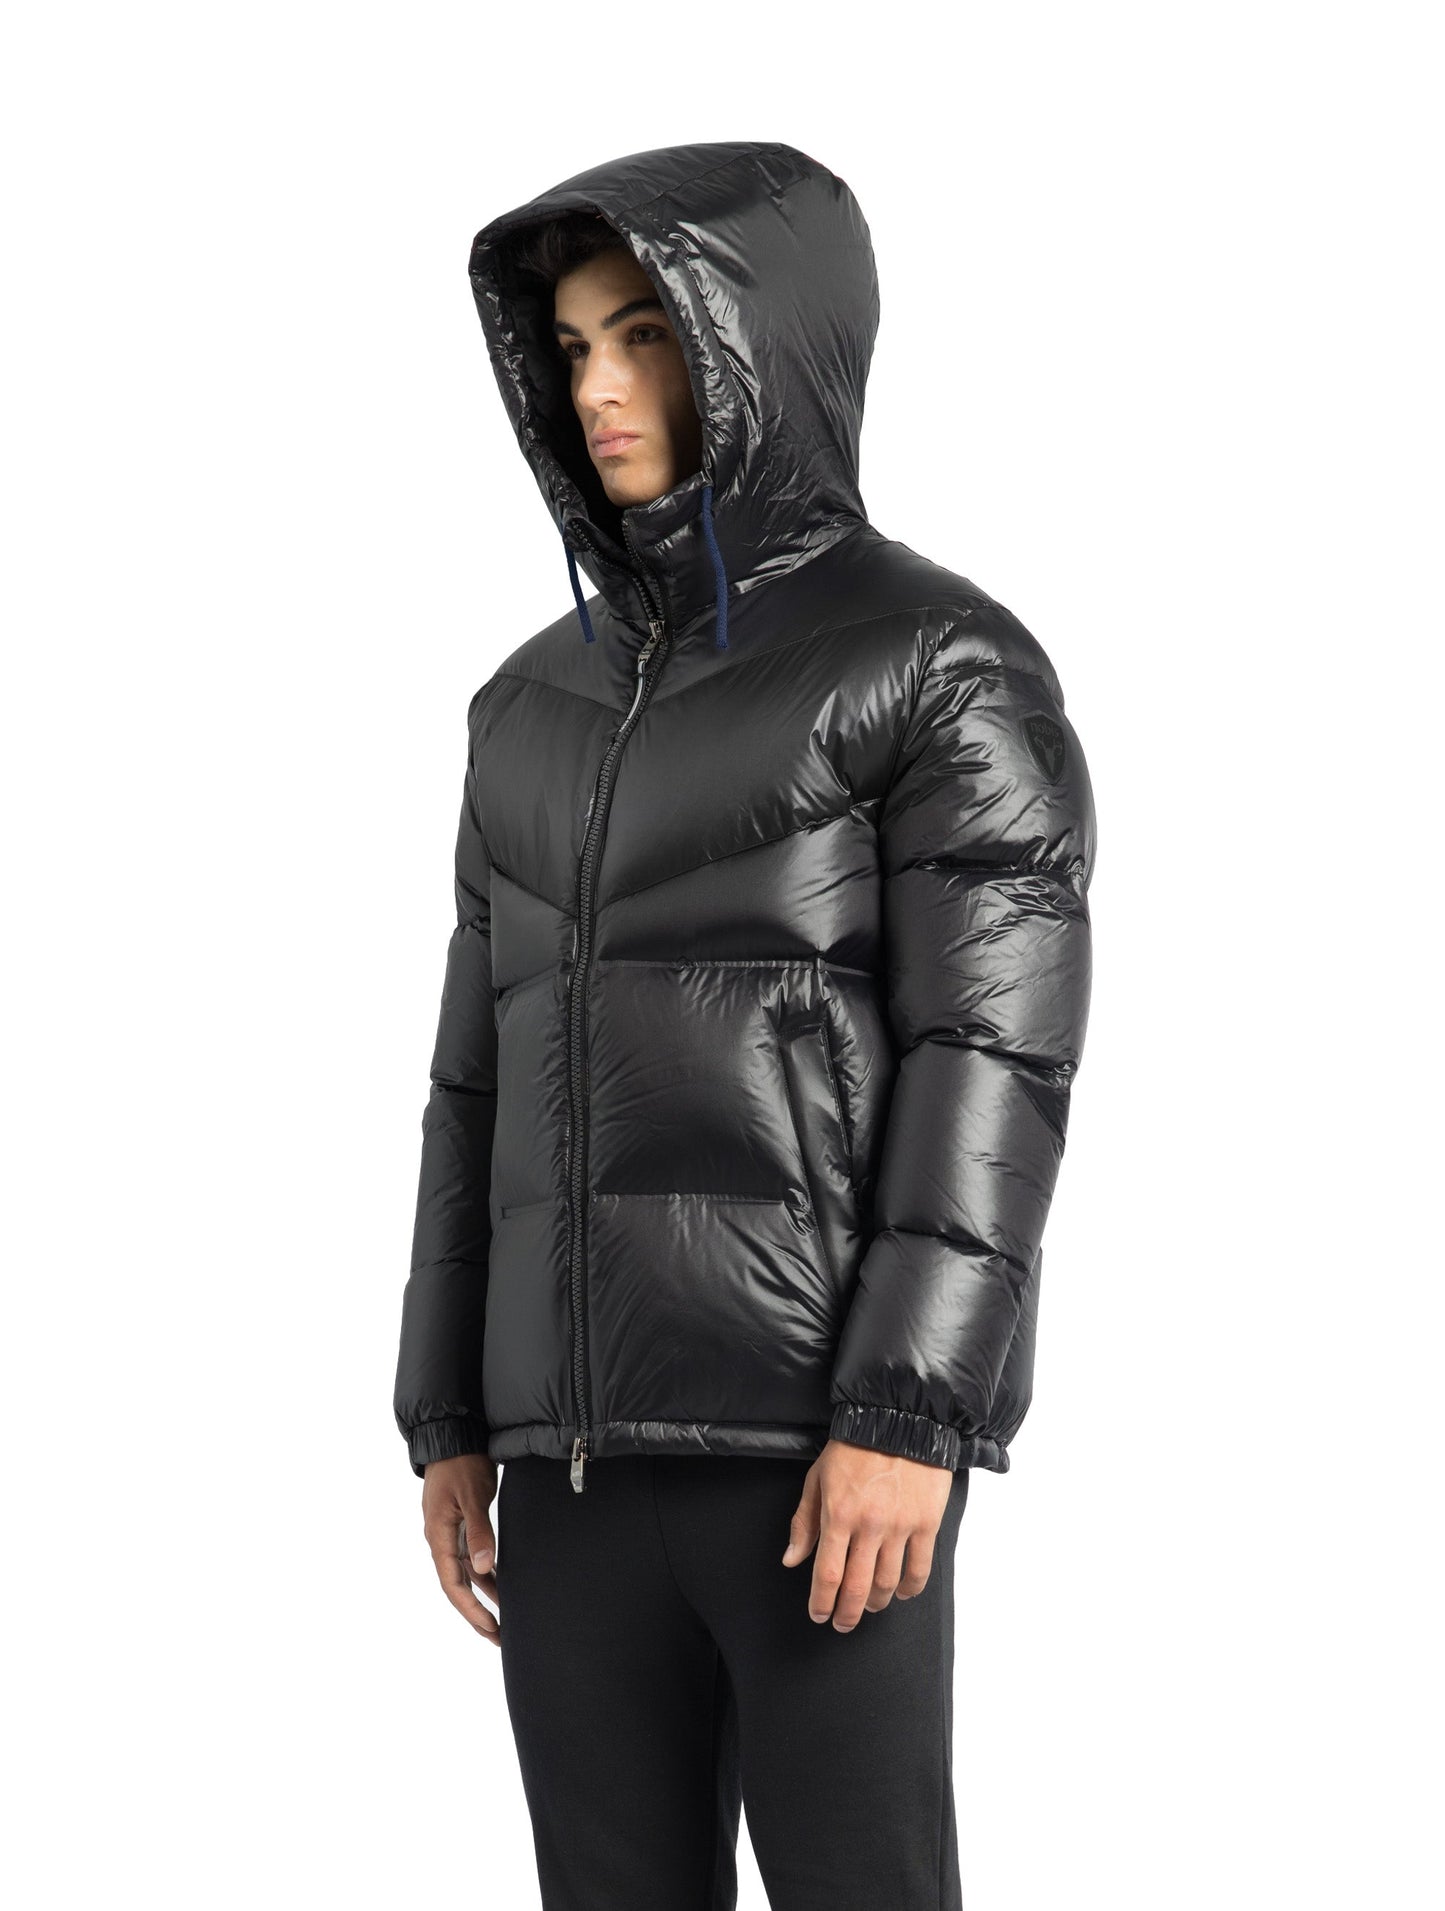 Dyna Men's Chevron Quilted Puffer Jacket in hip length, premium cire technical nylon taffeta fabrication, Premium Canadian origin White Duck Down insulation, non-removable down-filled hood, two-way centre-front zipper, fleece-lined zipper pockets at waist, pit zipper vents, in Black